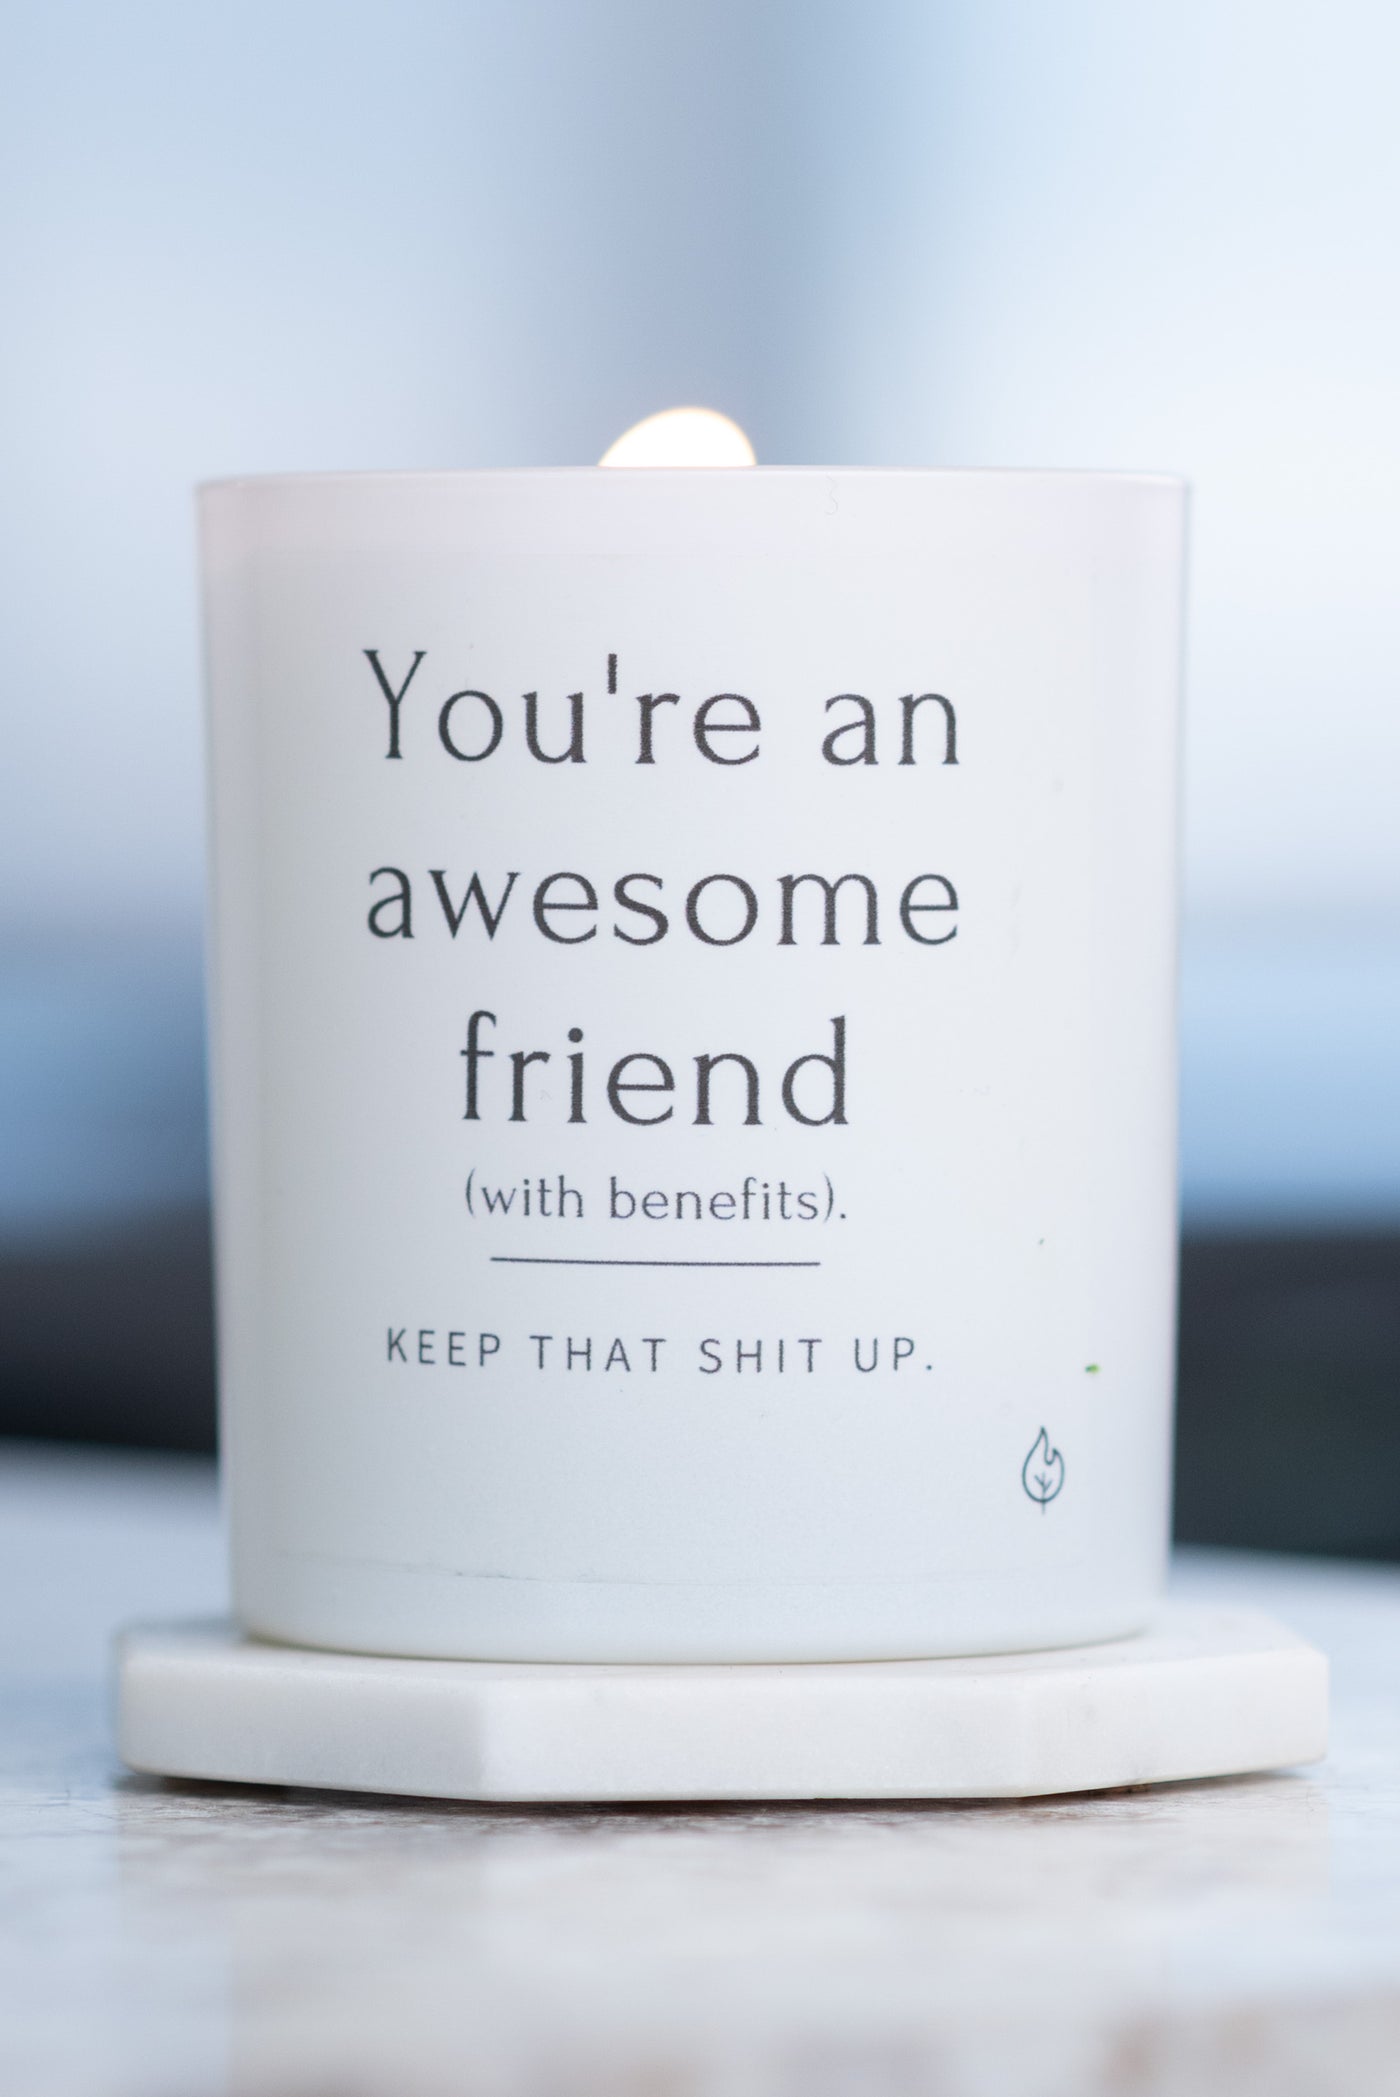 The Friends (with benefits) Candle